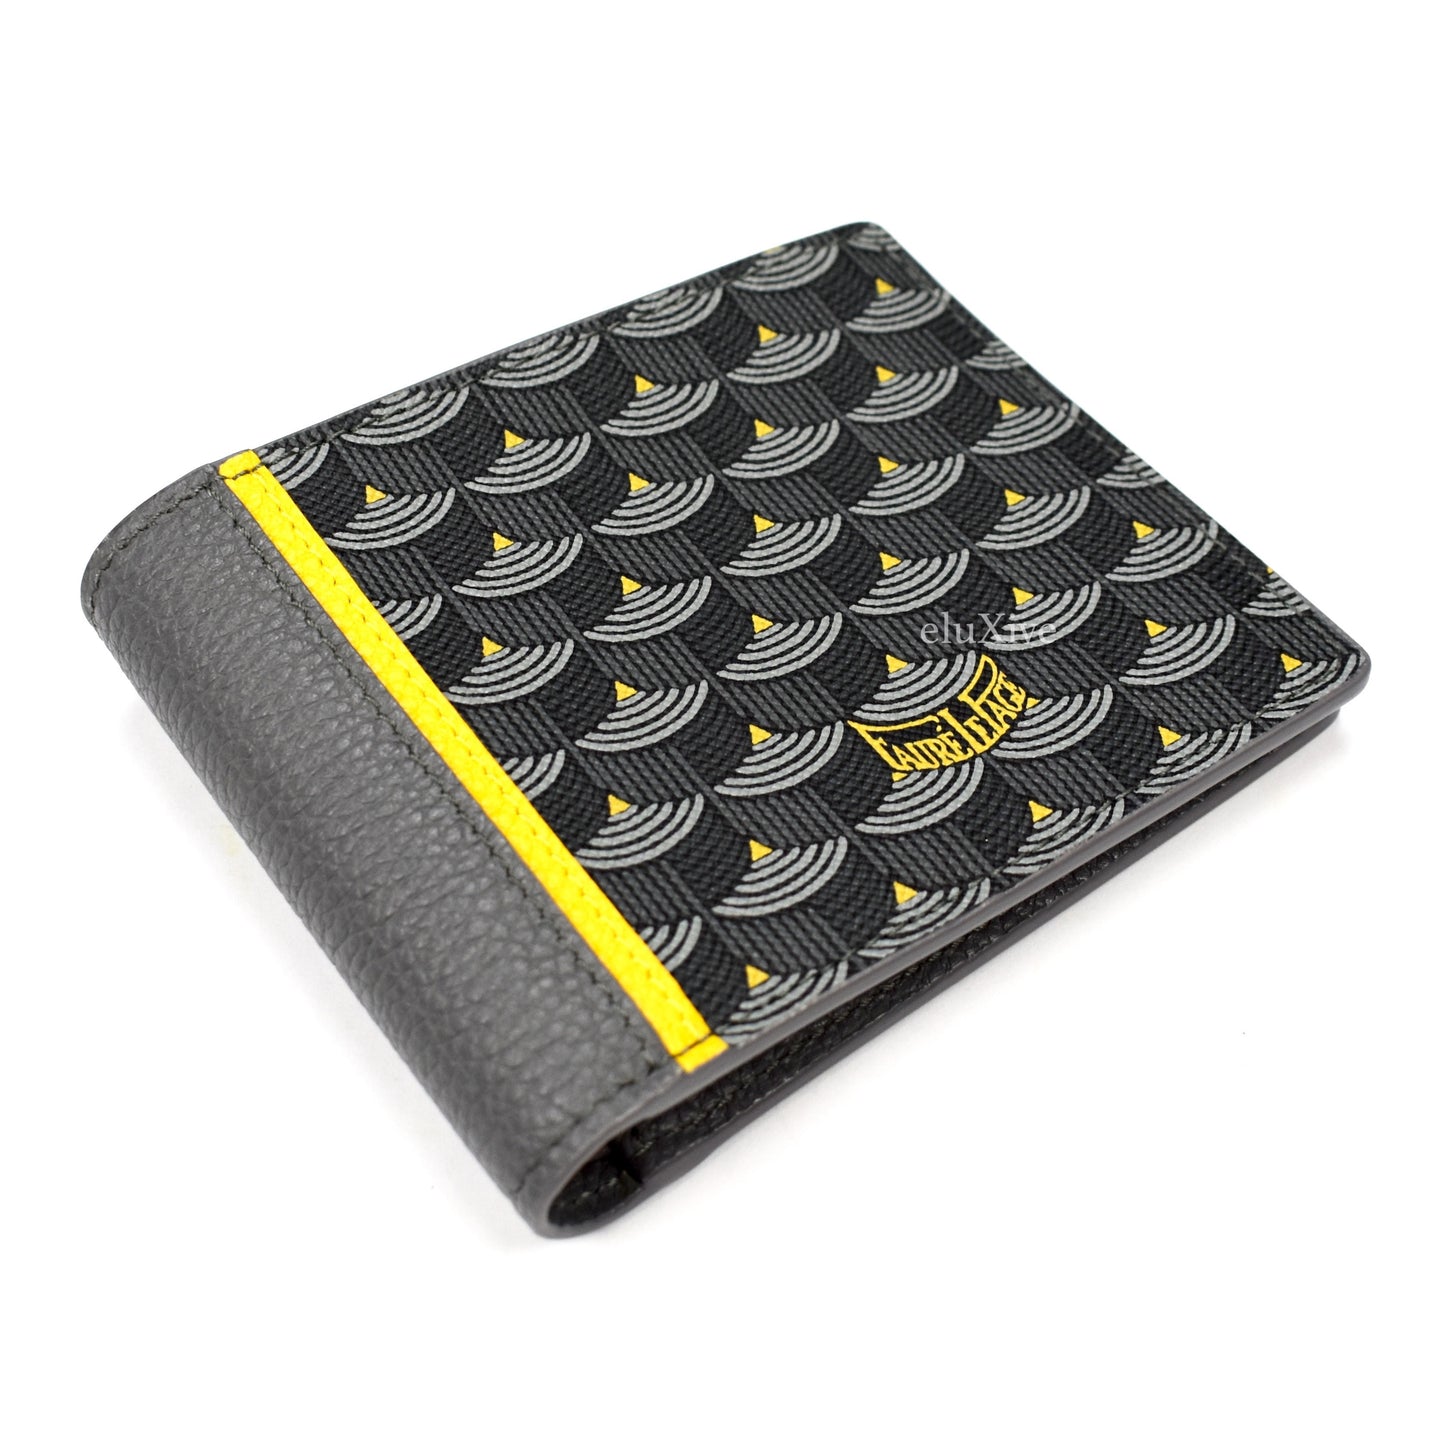 Faure Le Page - Steel Gray / Yellow 6CC Bifold Wallet (2019)